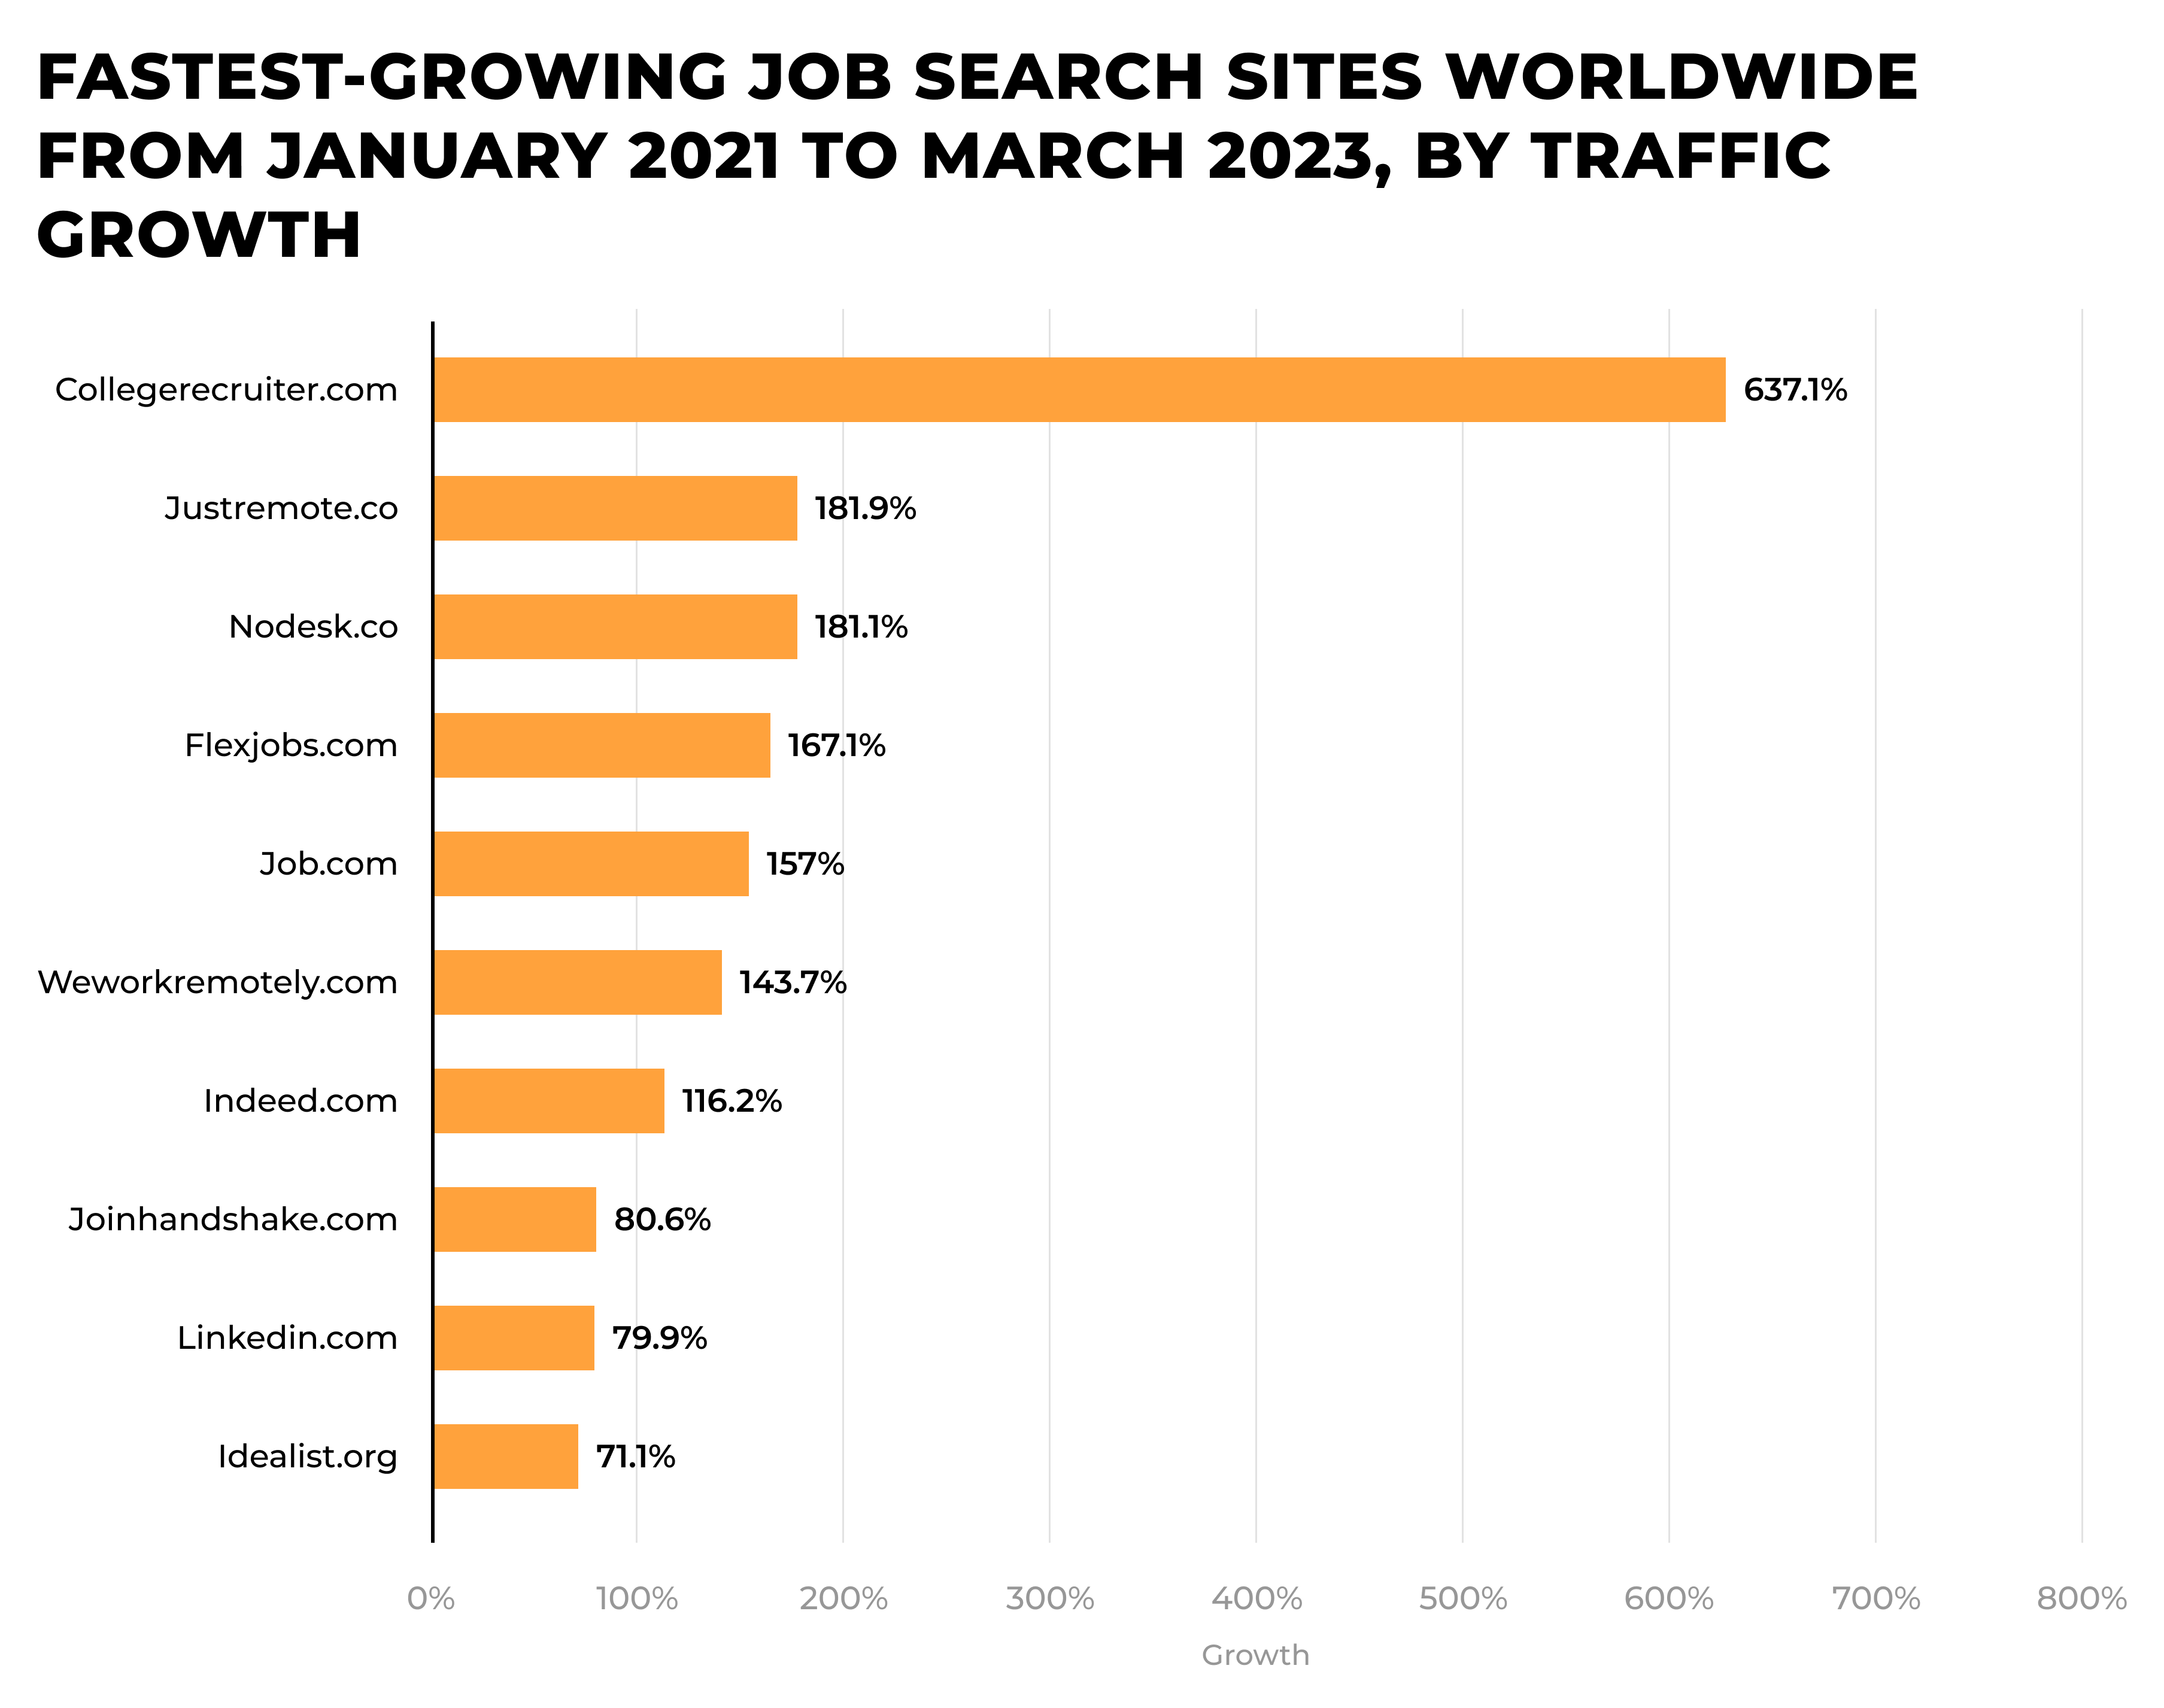 Fastest-growing job search sites worldwide from January 2021 to March 2023, by traffic growth